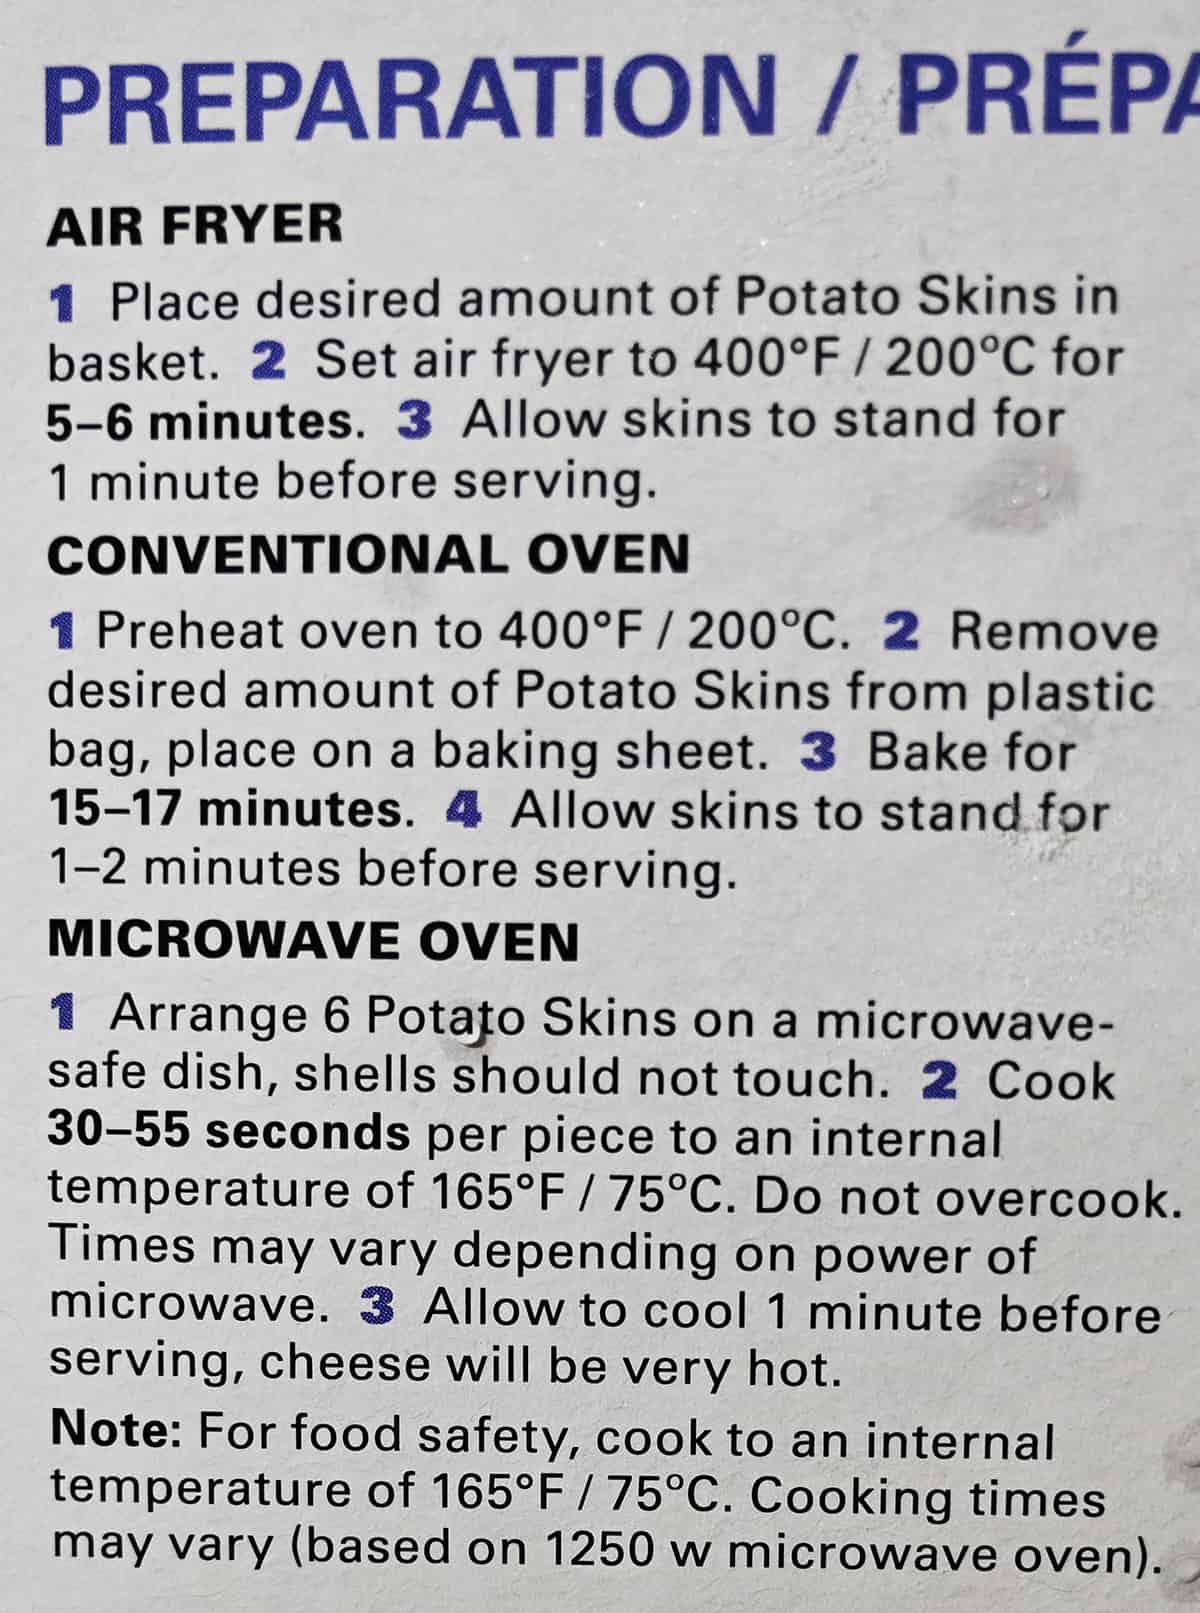 Image of the cooking instructions for the potato skins from the back of the box.